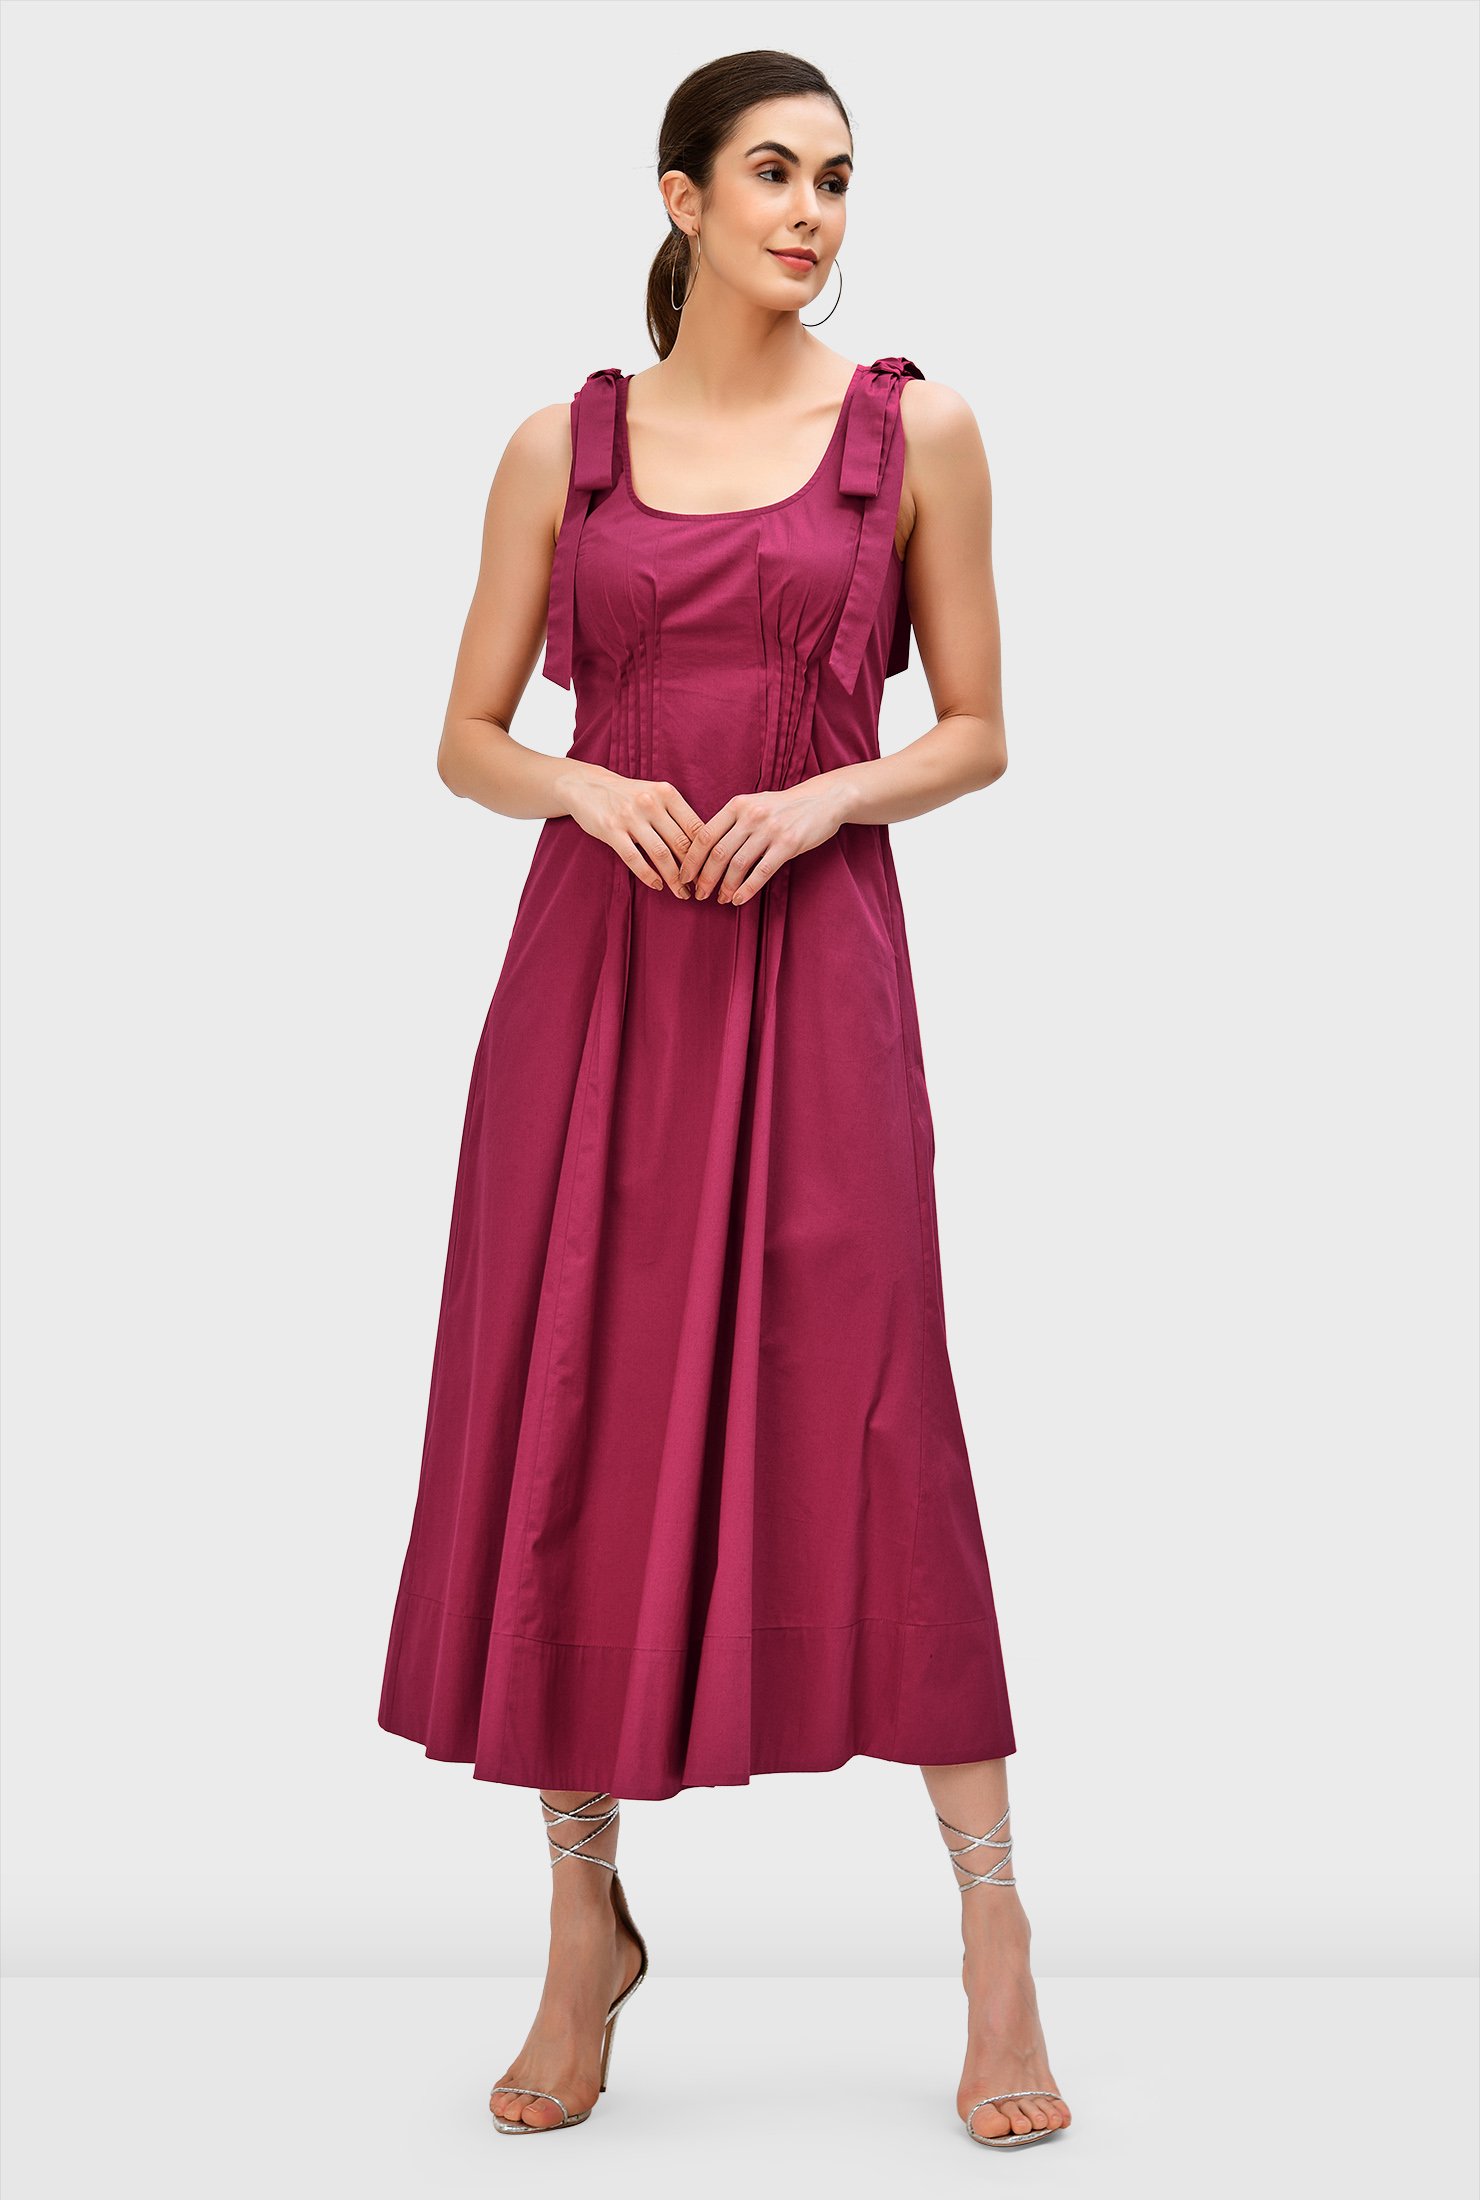 The sweet drape of bows beautifully top our crisp cotton poplin dress textured with pintuck pleats that cinch in the waist and release at the bodice as well as the full flare skirt.